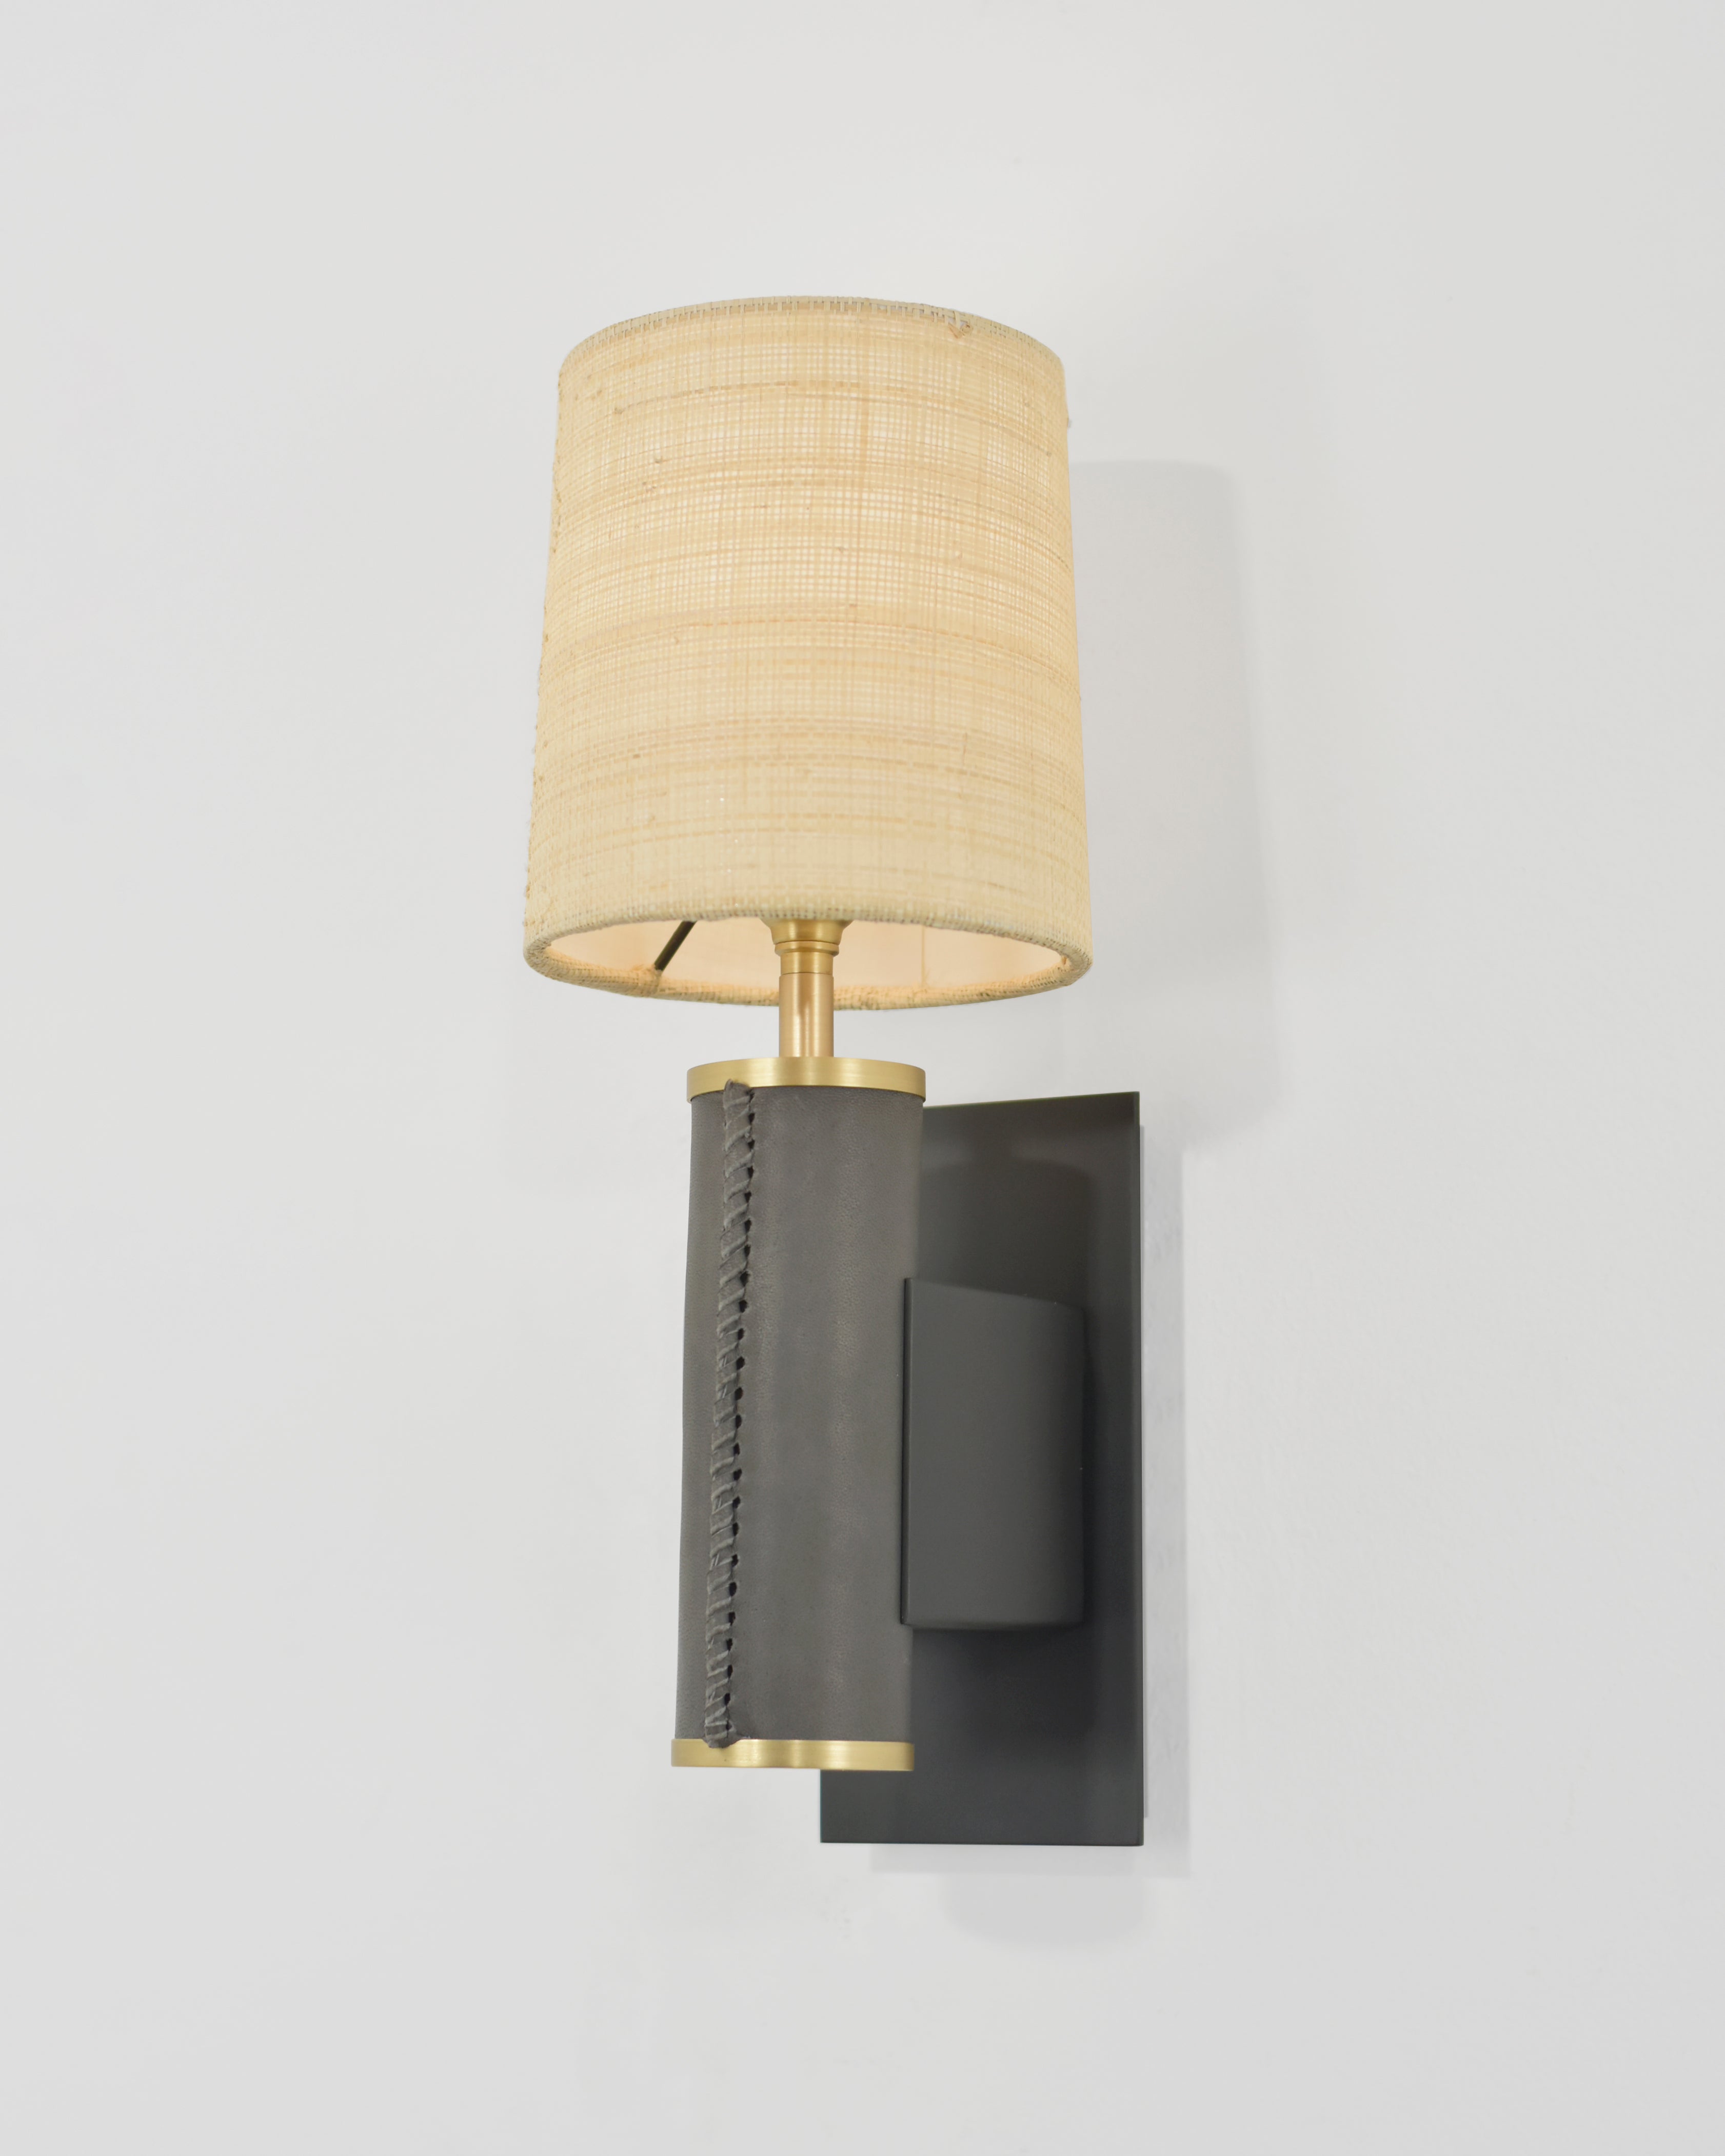 Patinated Steel and Brushed Brass with Mink Leather and Raffia Shade